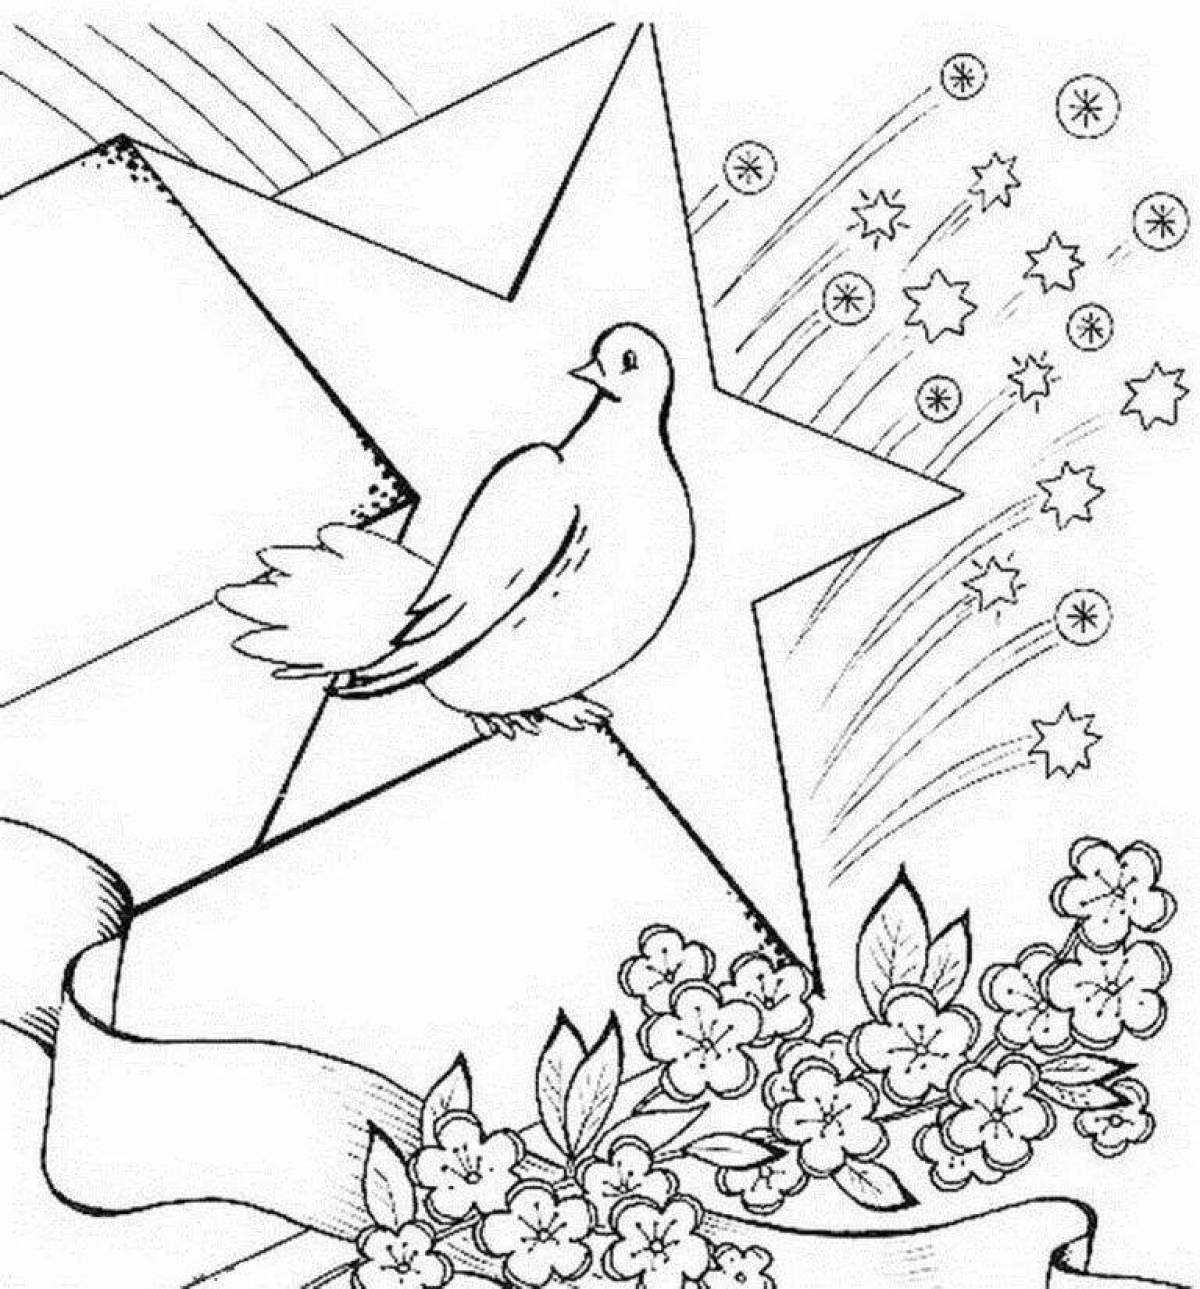 Adorable no war coloring book for kids